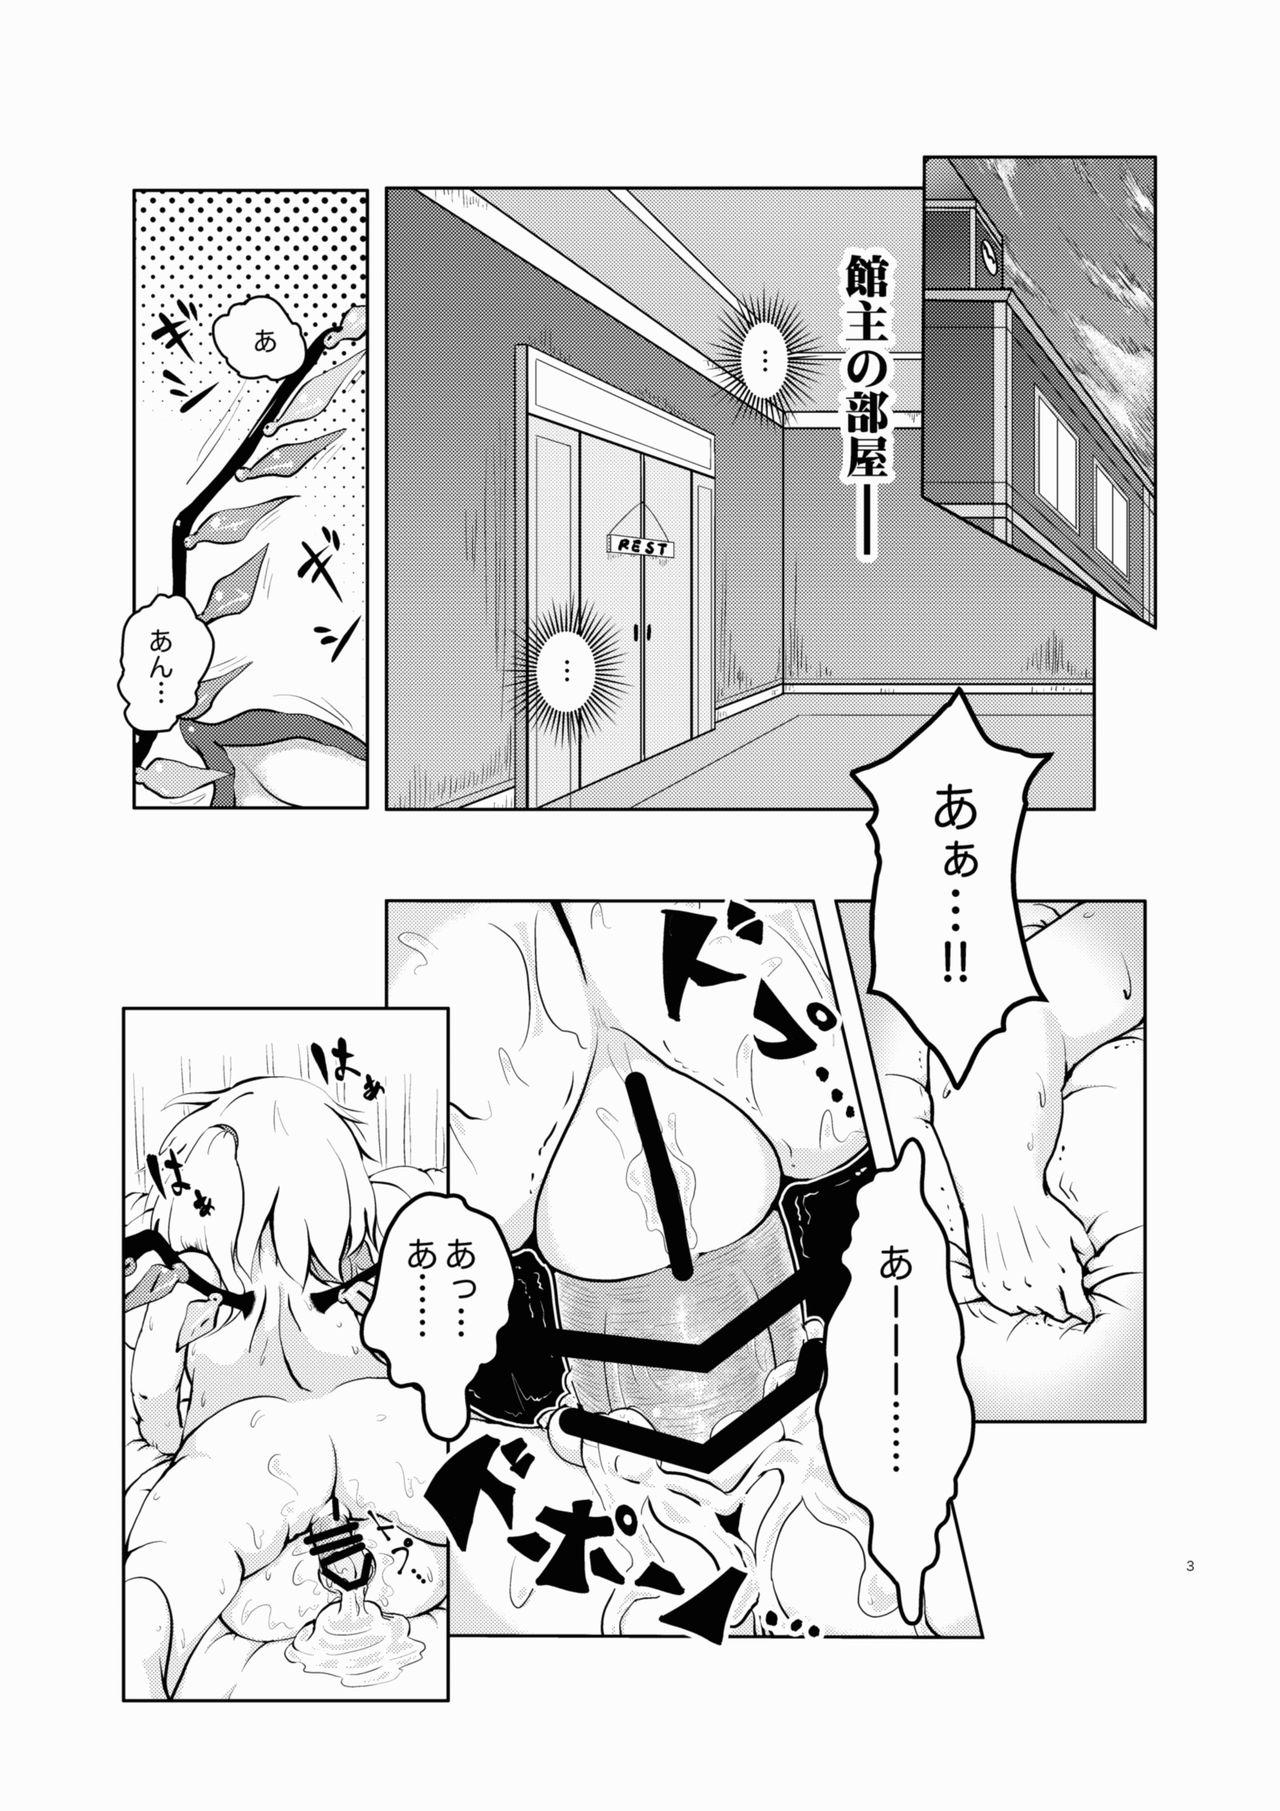 Fuck Com Scarlet Conflict 1 - Touhou project Livecams - Page 3